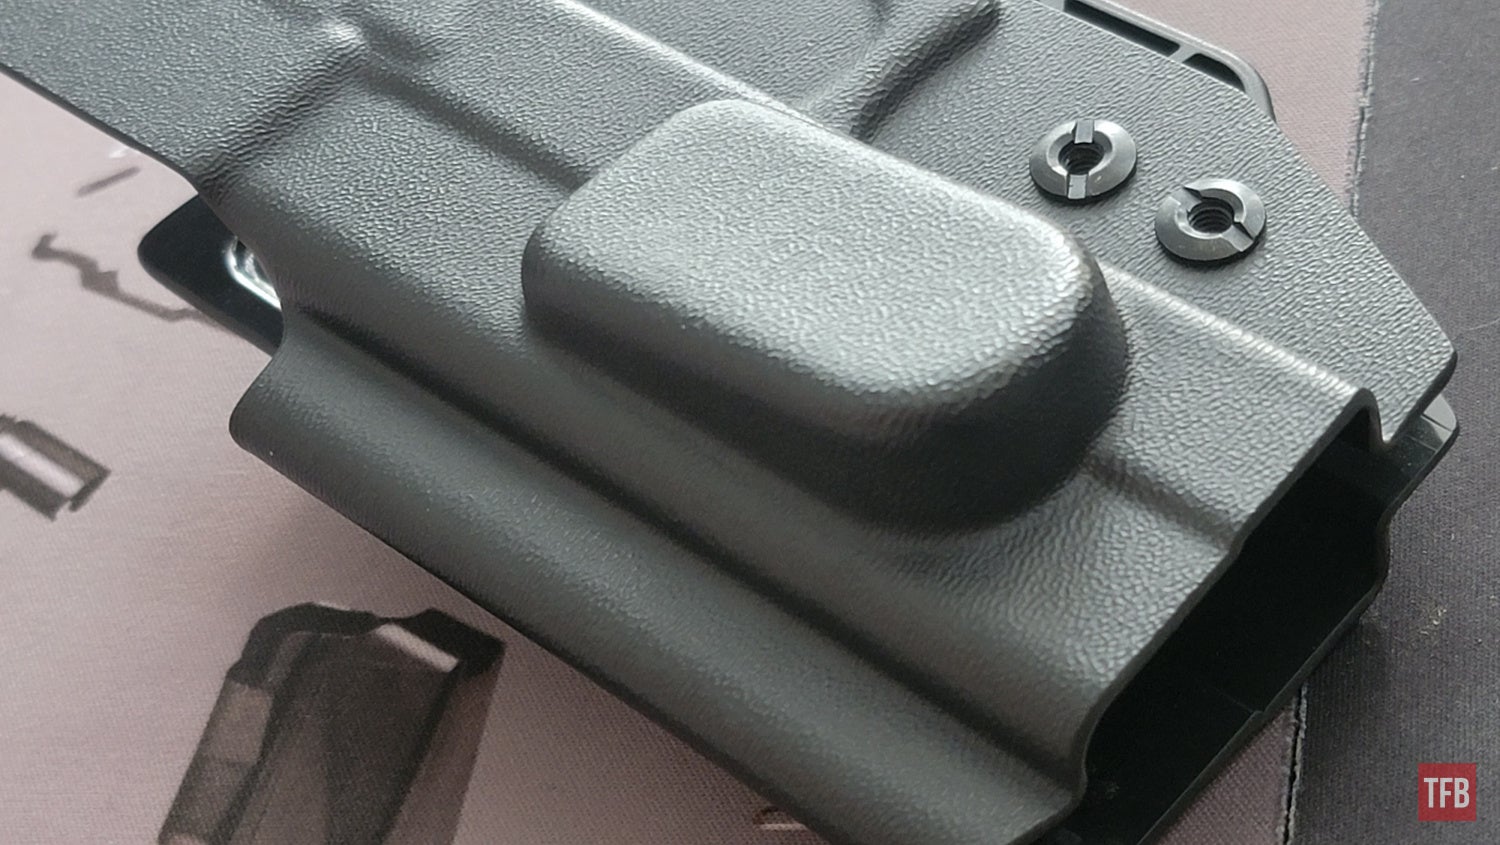 TFB REVIEW: A+I MFG's Affordable Glock 48 Kydex Holster